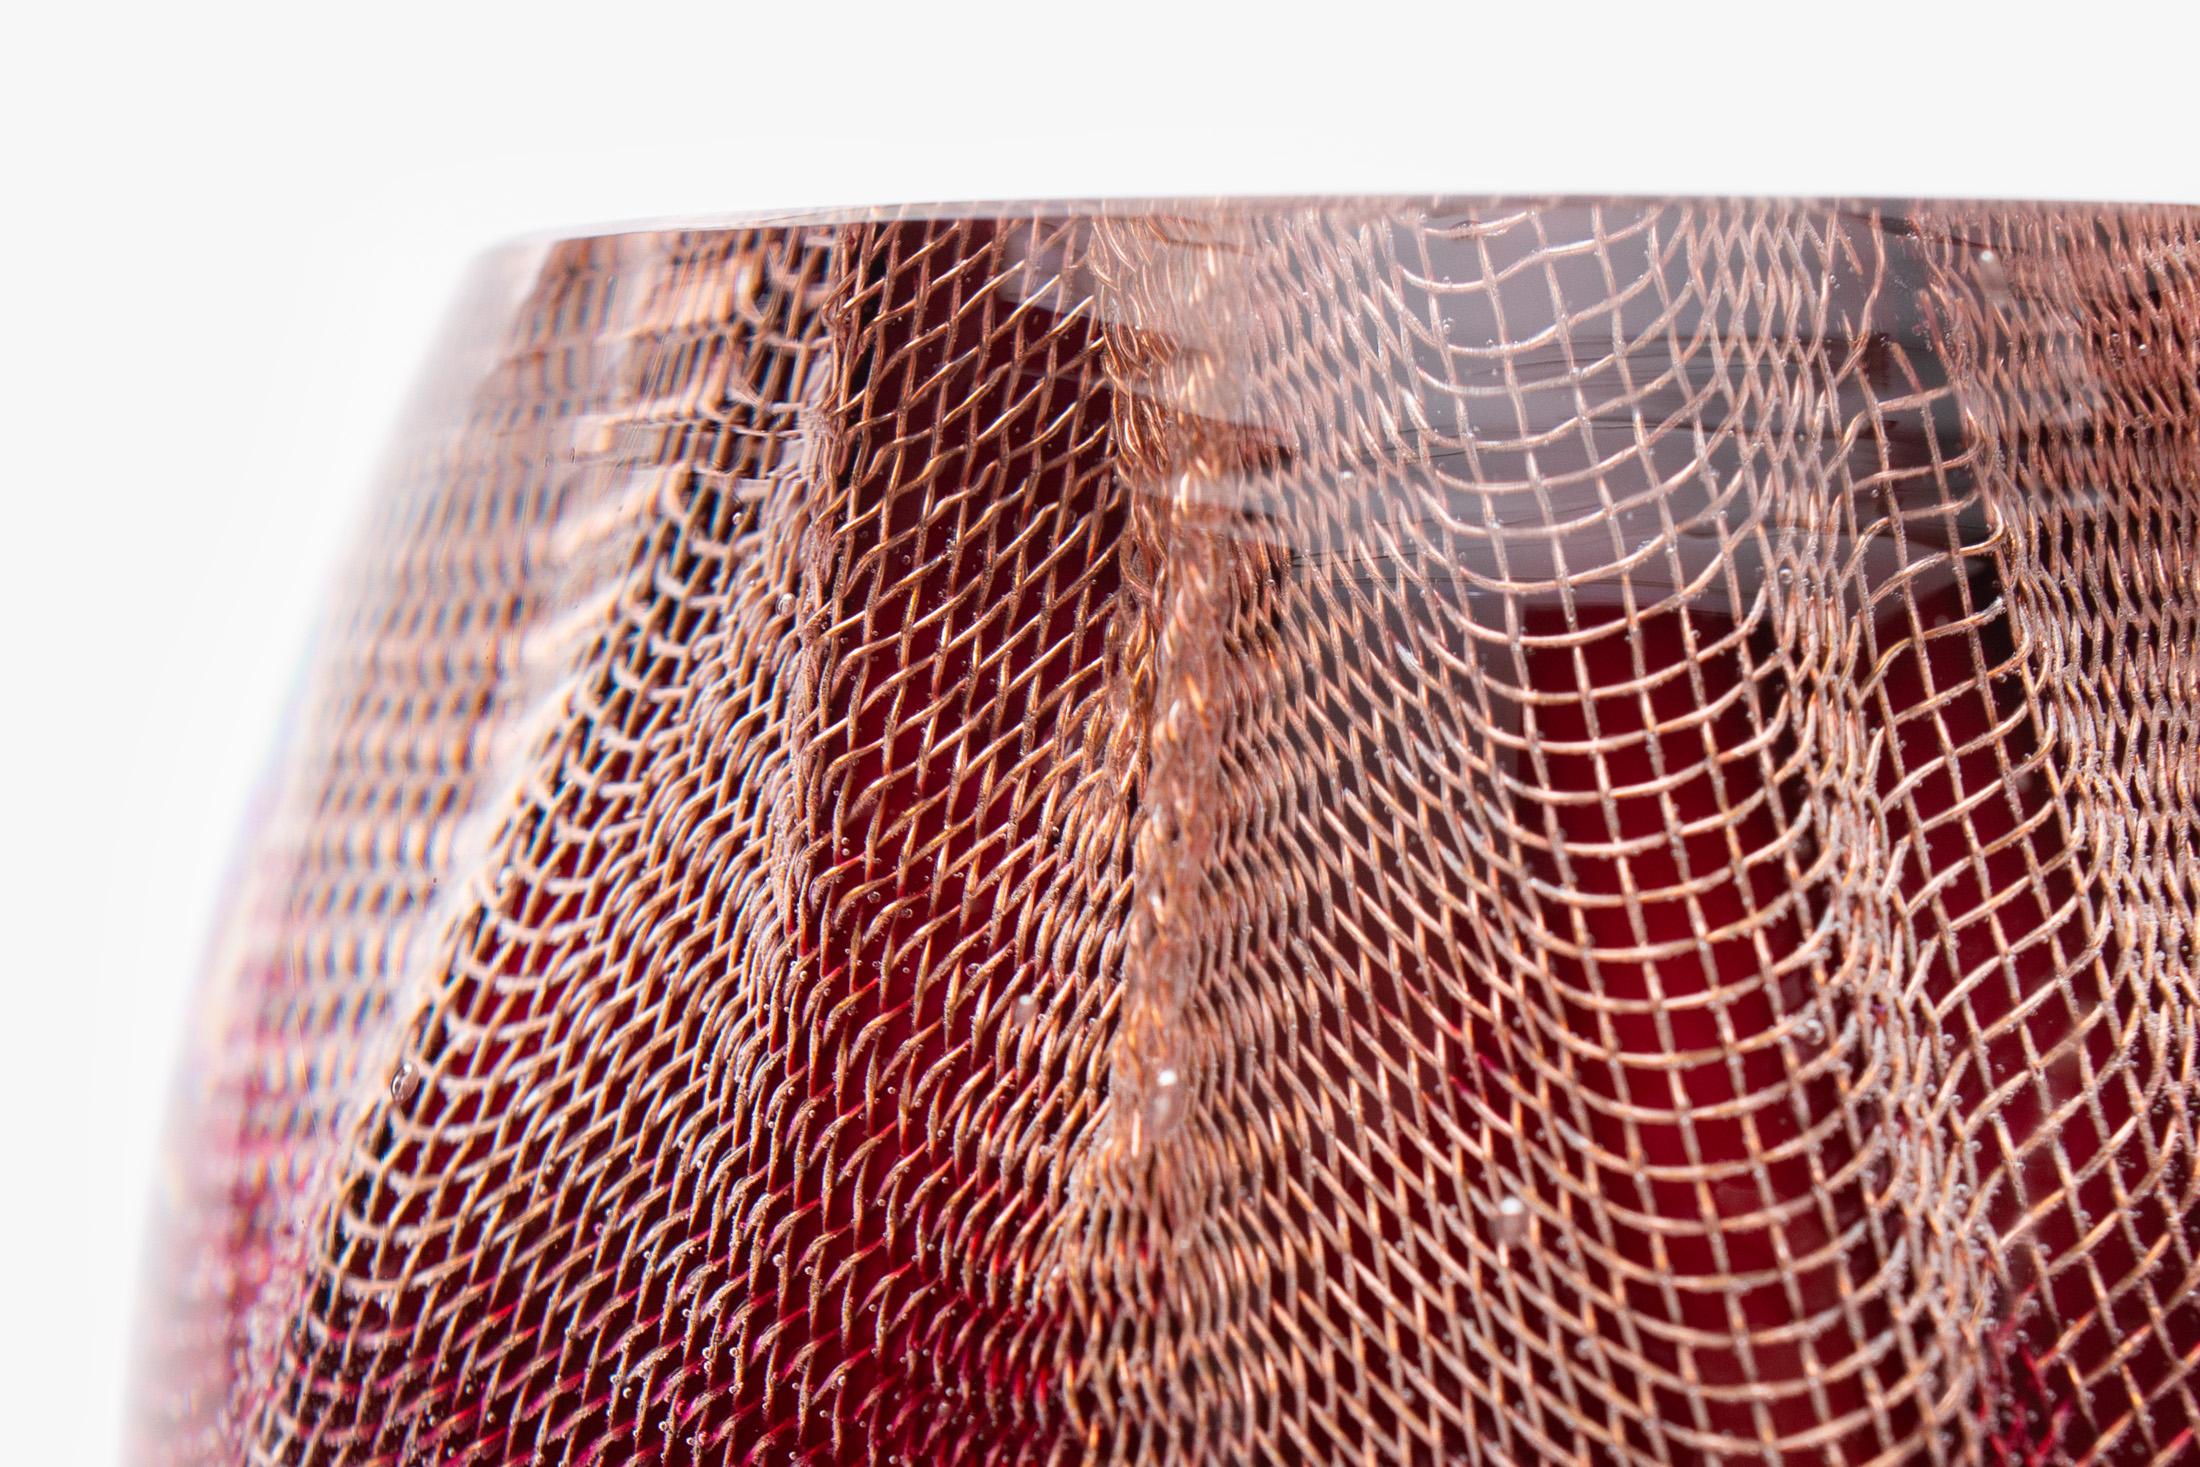 Glass and Copper Mesh Vase by Omer Arbel For OAO Works, Fuschia im Zustand „Neu“ im Angebot in Vancouver, British Columbia